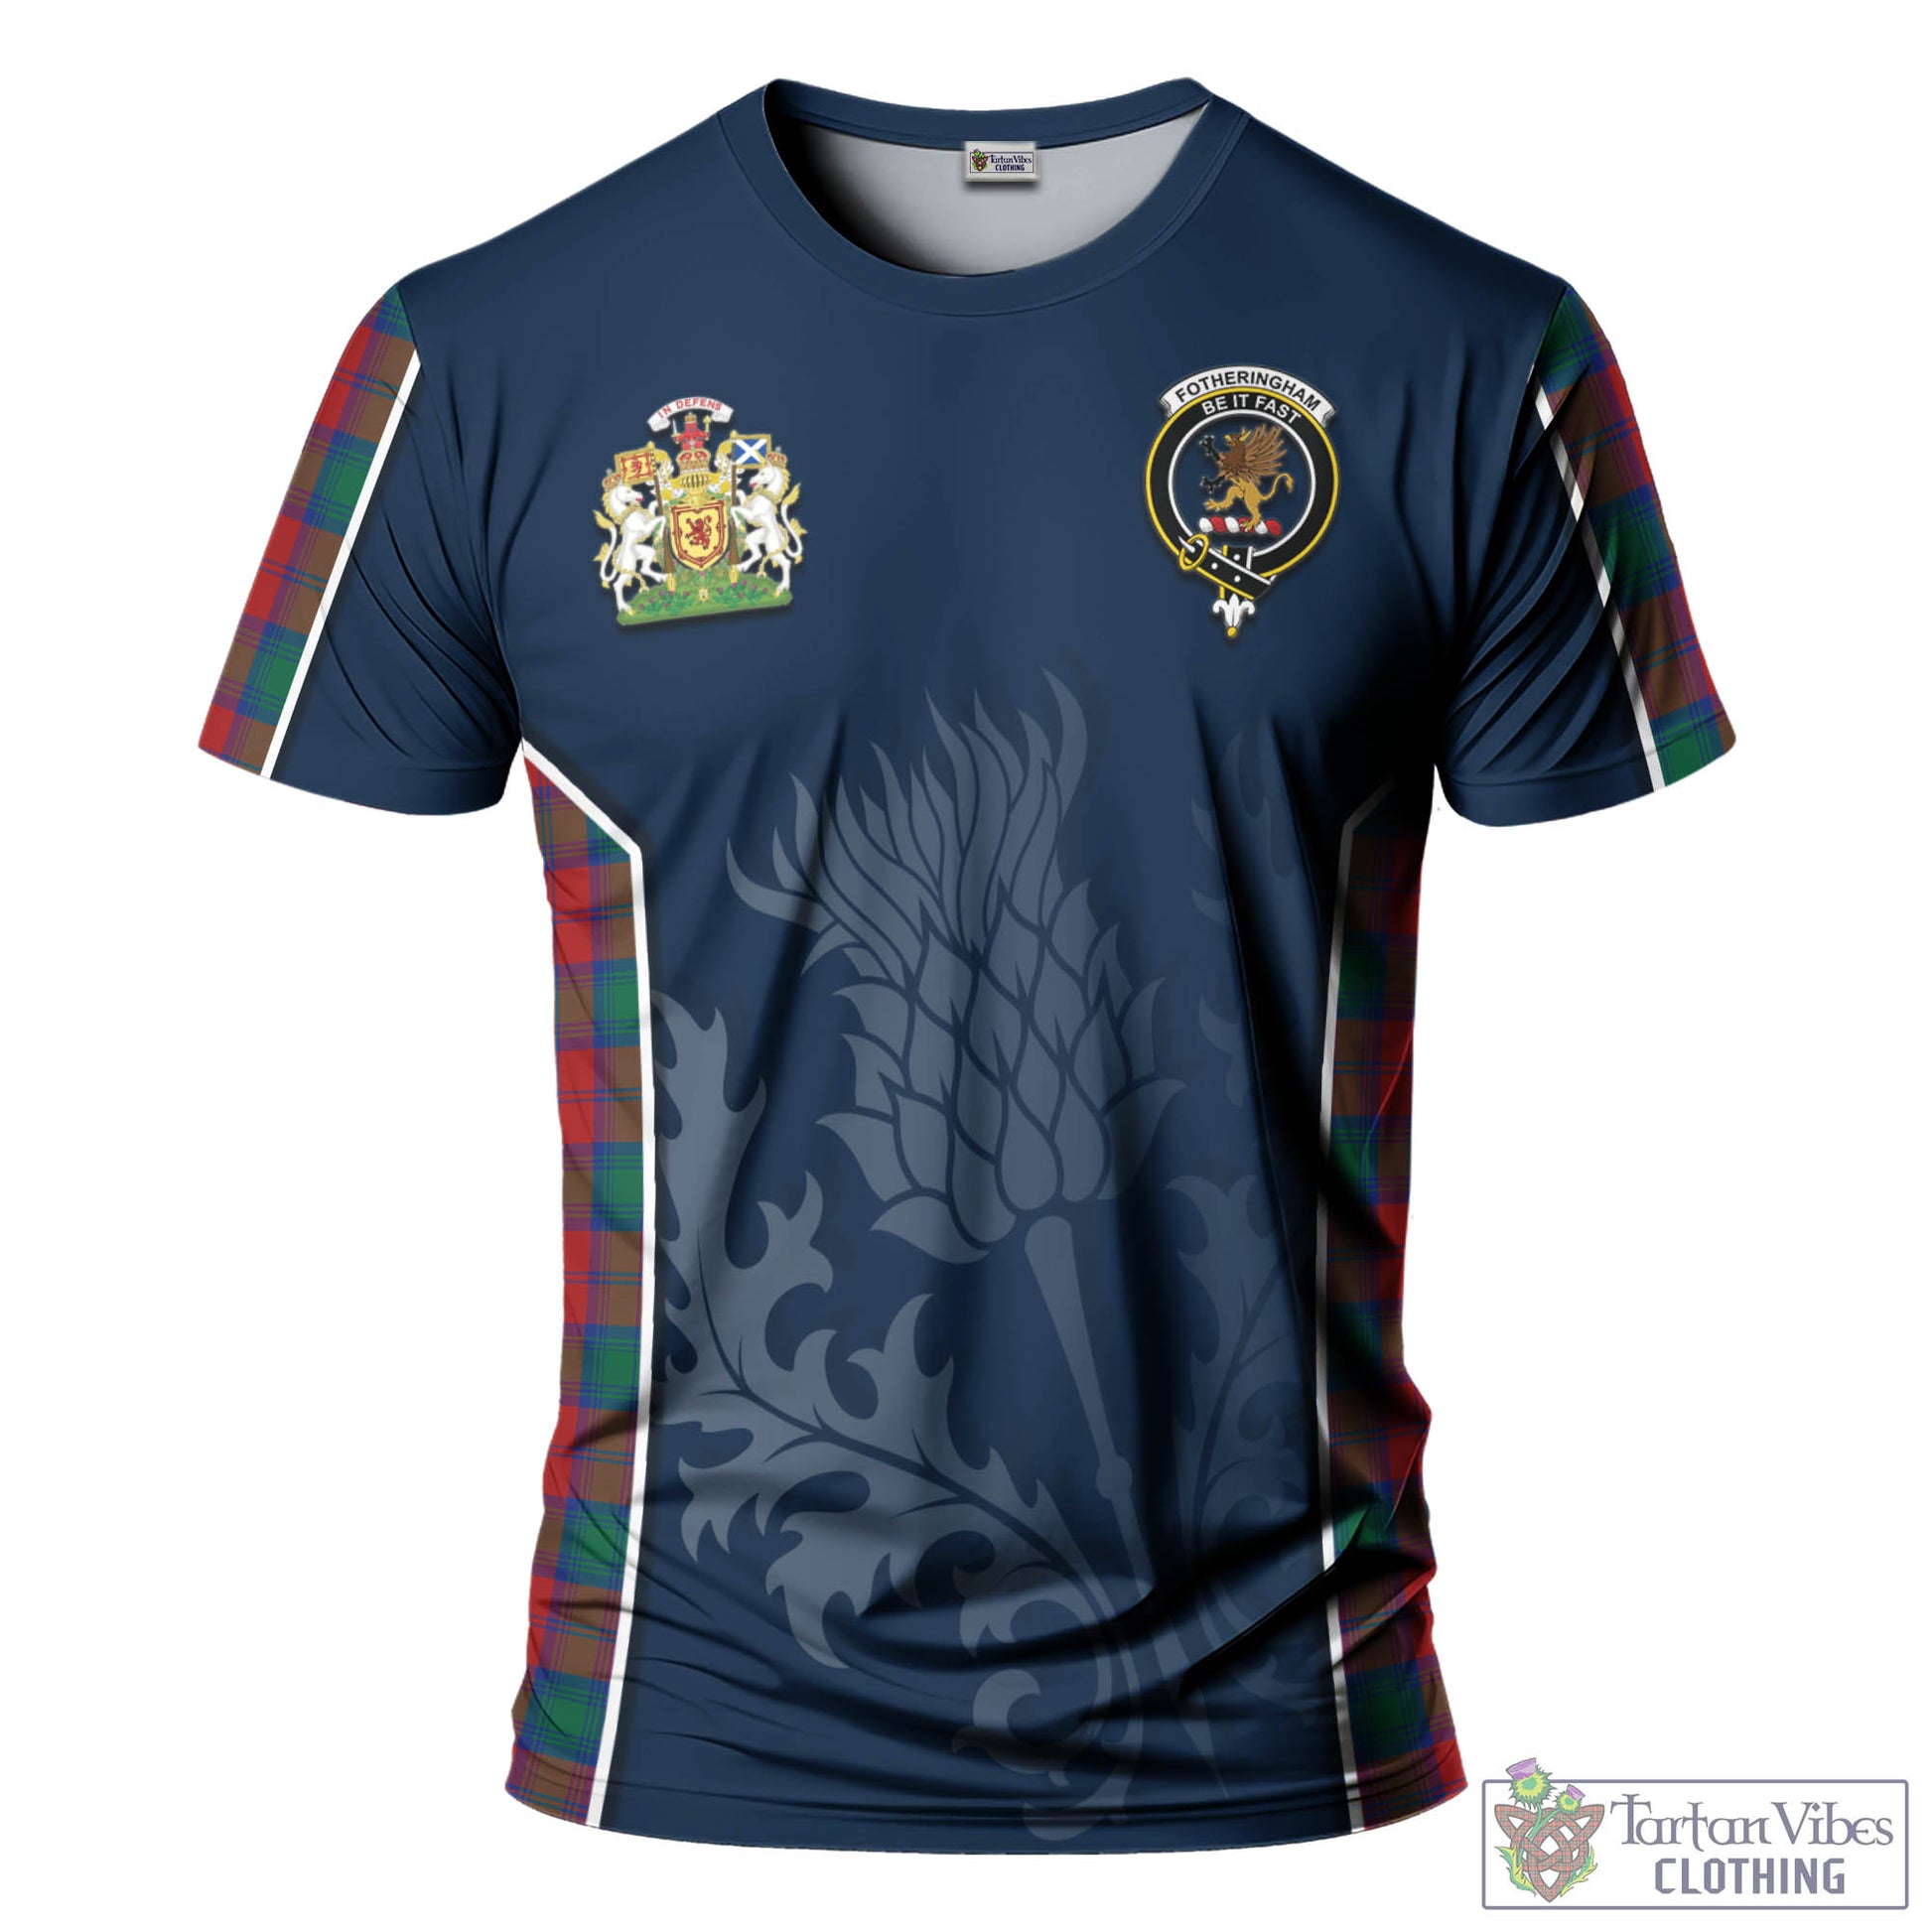 Tartan Vibes Clothing Fotheringham Modern Tartan T-Shirt with Family Crest and Scottish Thistle Vibes Sport Style